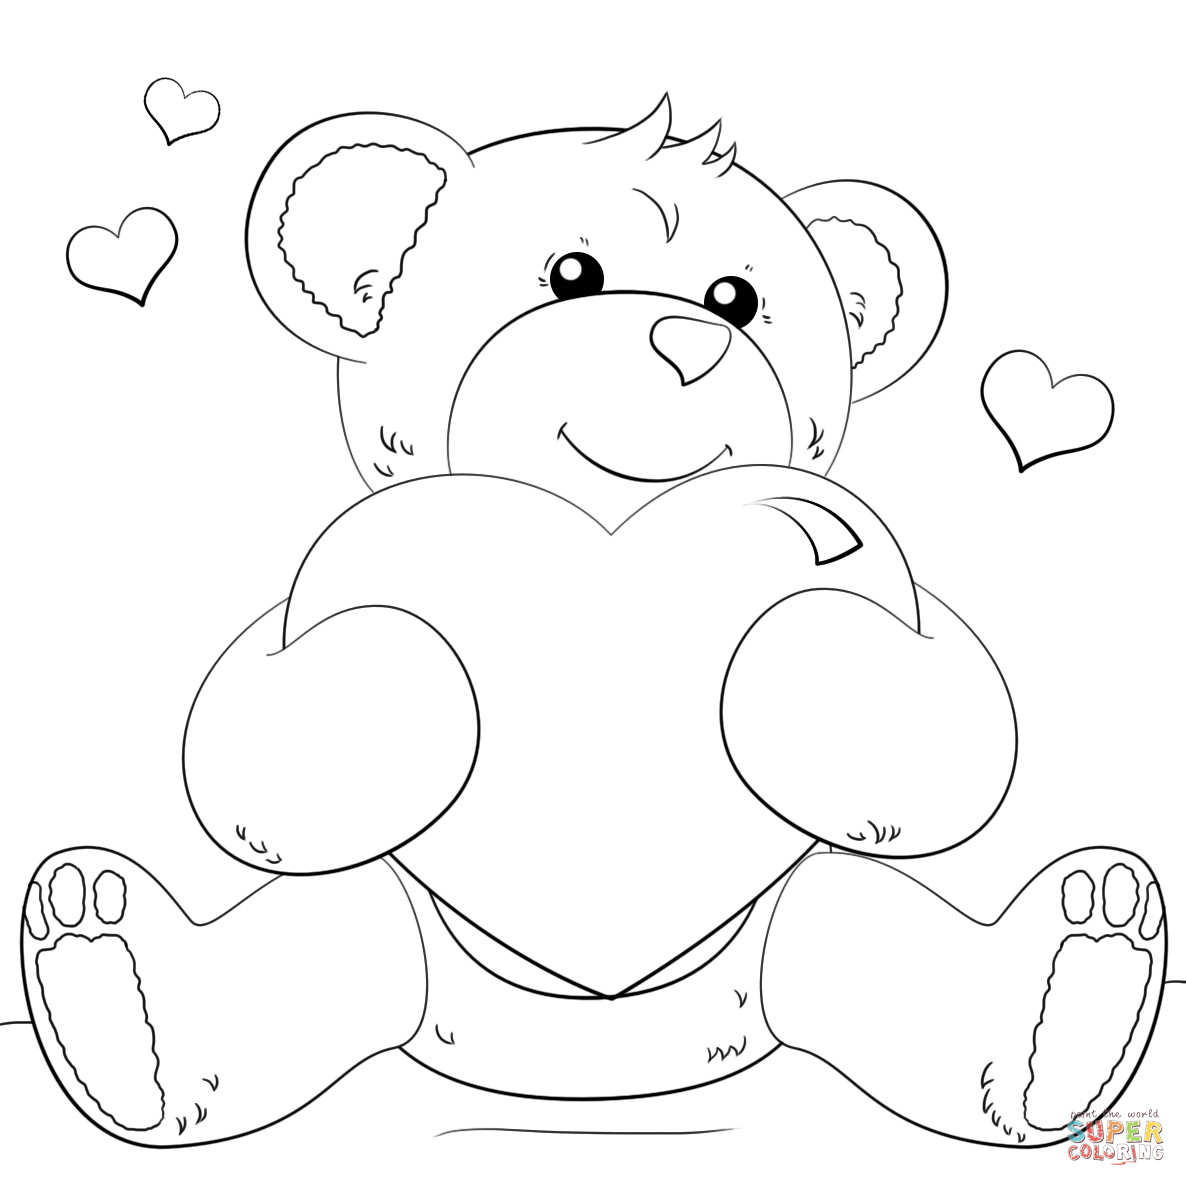 Cute Bear With Heart Coloring Page | Free Printable Coloring Pages - Free Printable Hearts